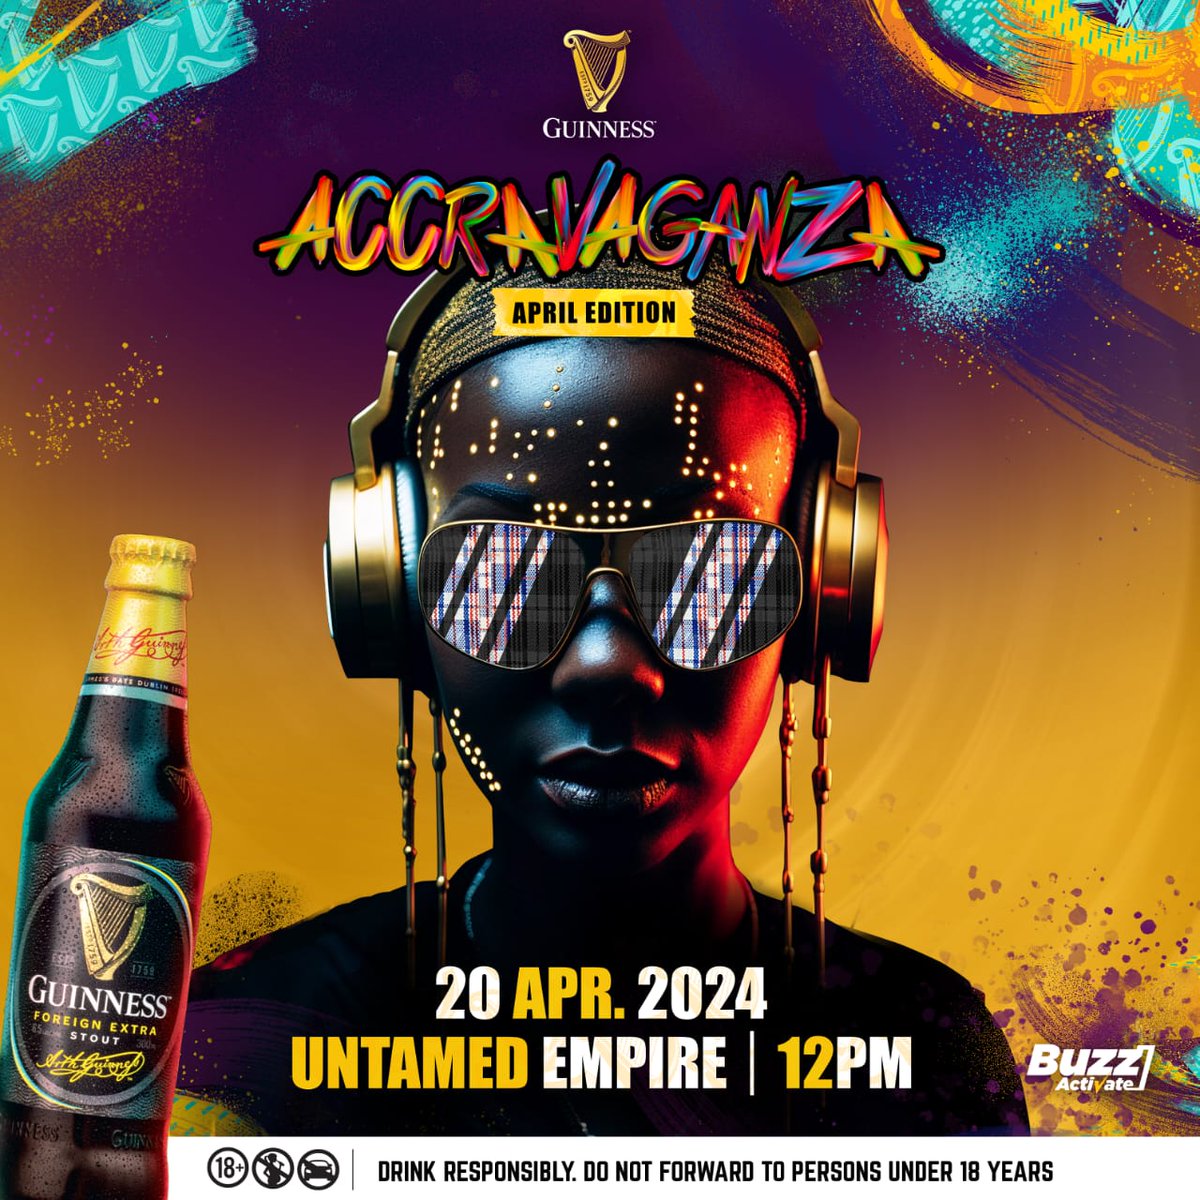 Get ready to experience the ultimate party vibes at Accravaganza on April 20th🎉 #GuinessAccravaganza